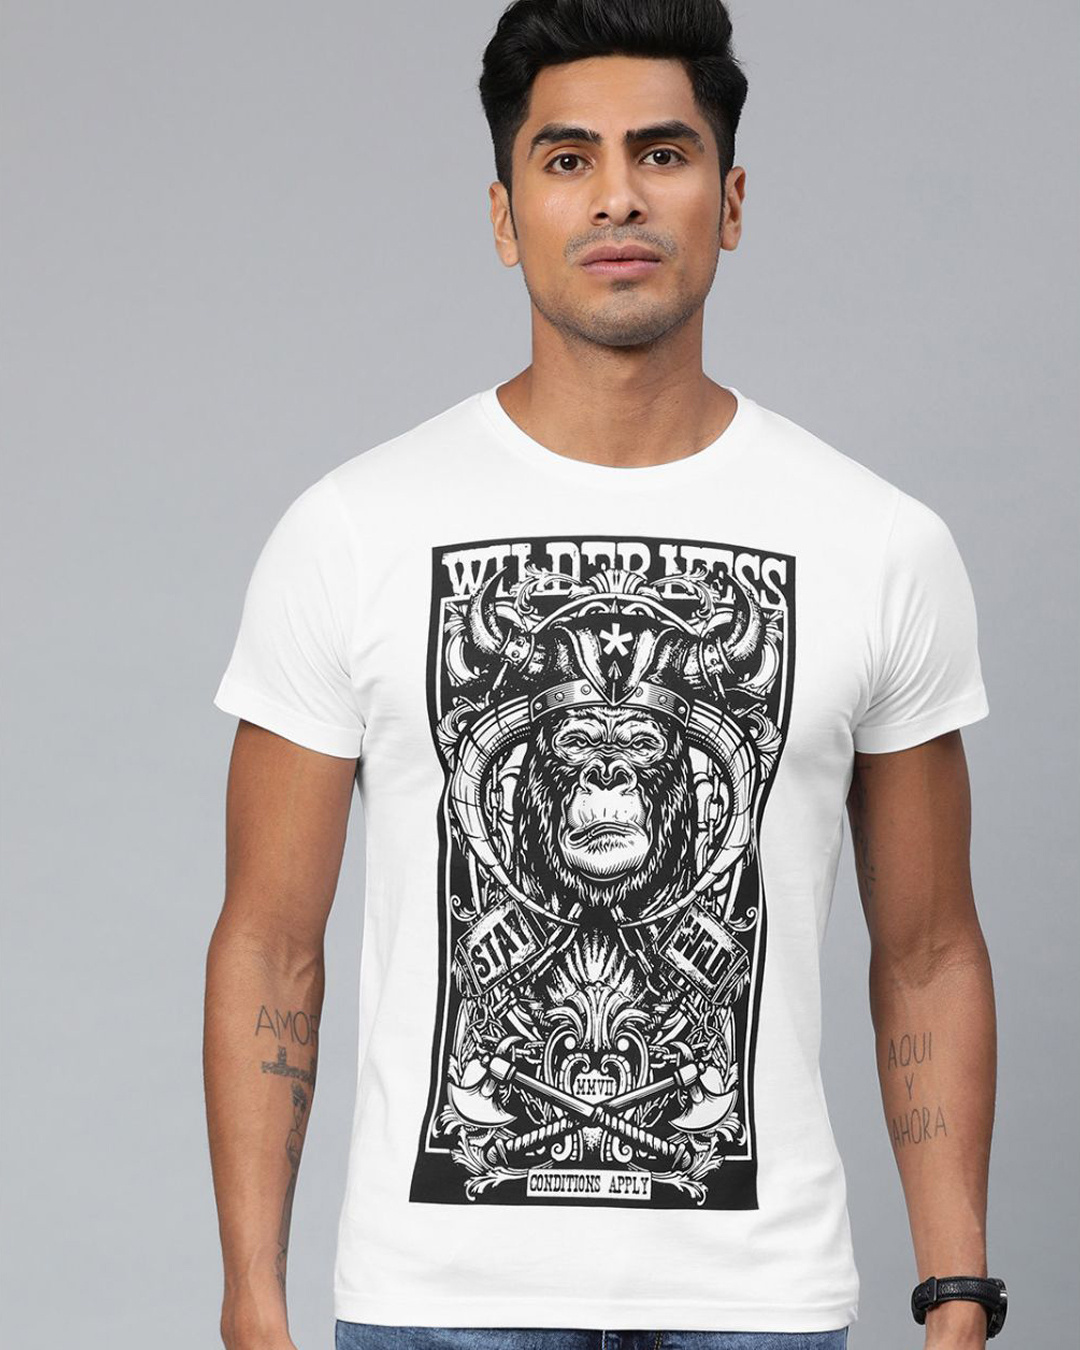 Buy Conditions Apply White Graphic T-Shirt for Men White Online at Bewakoof